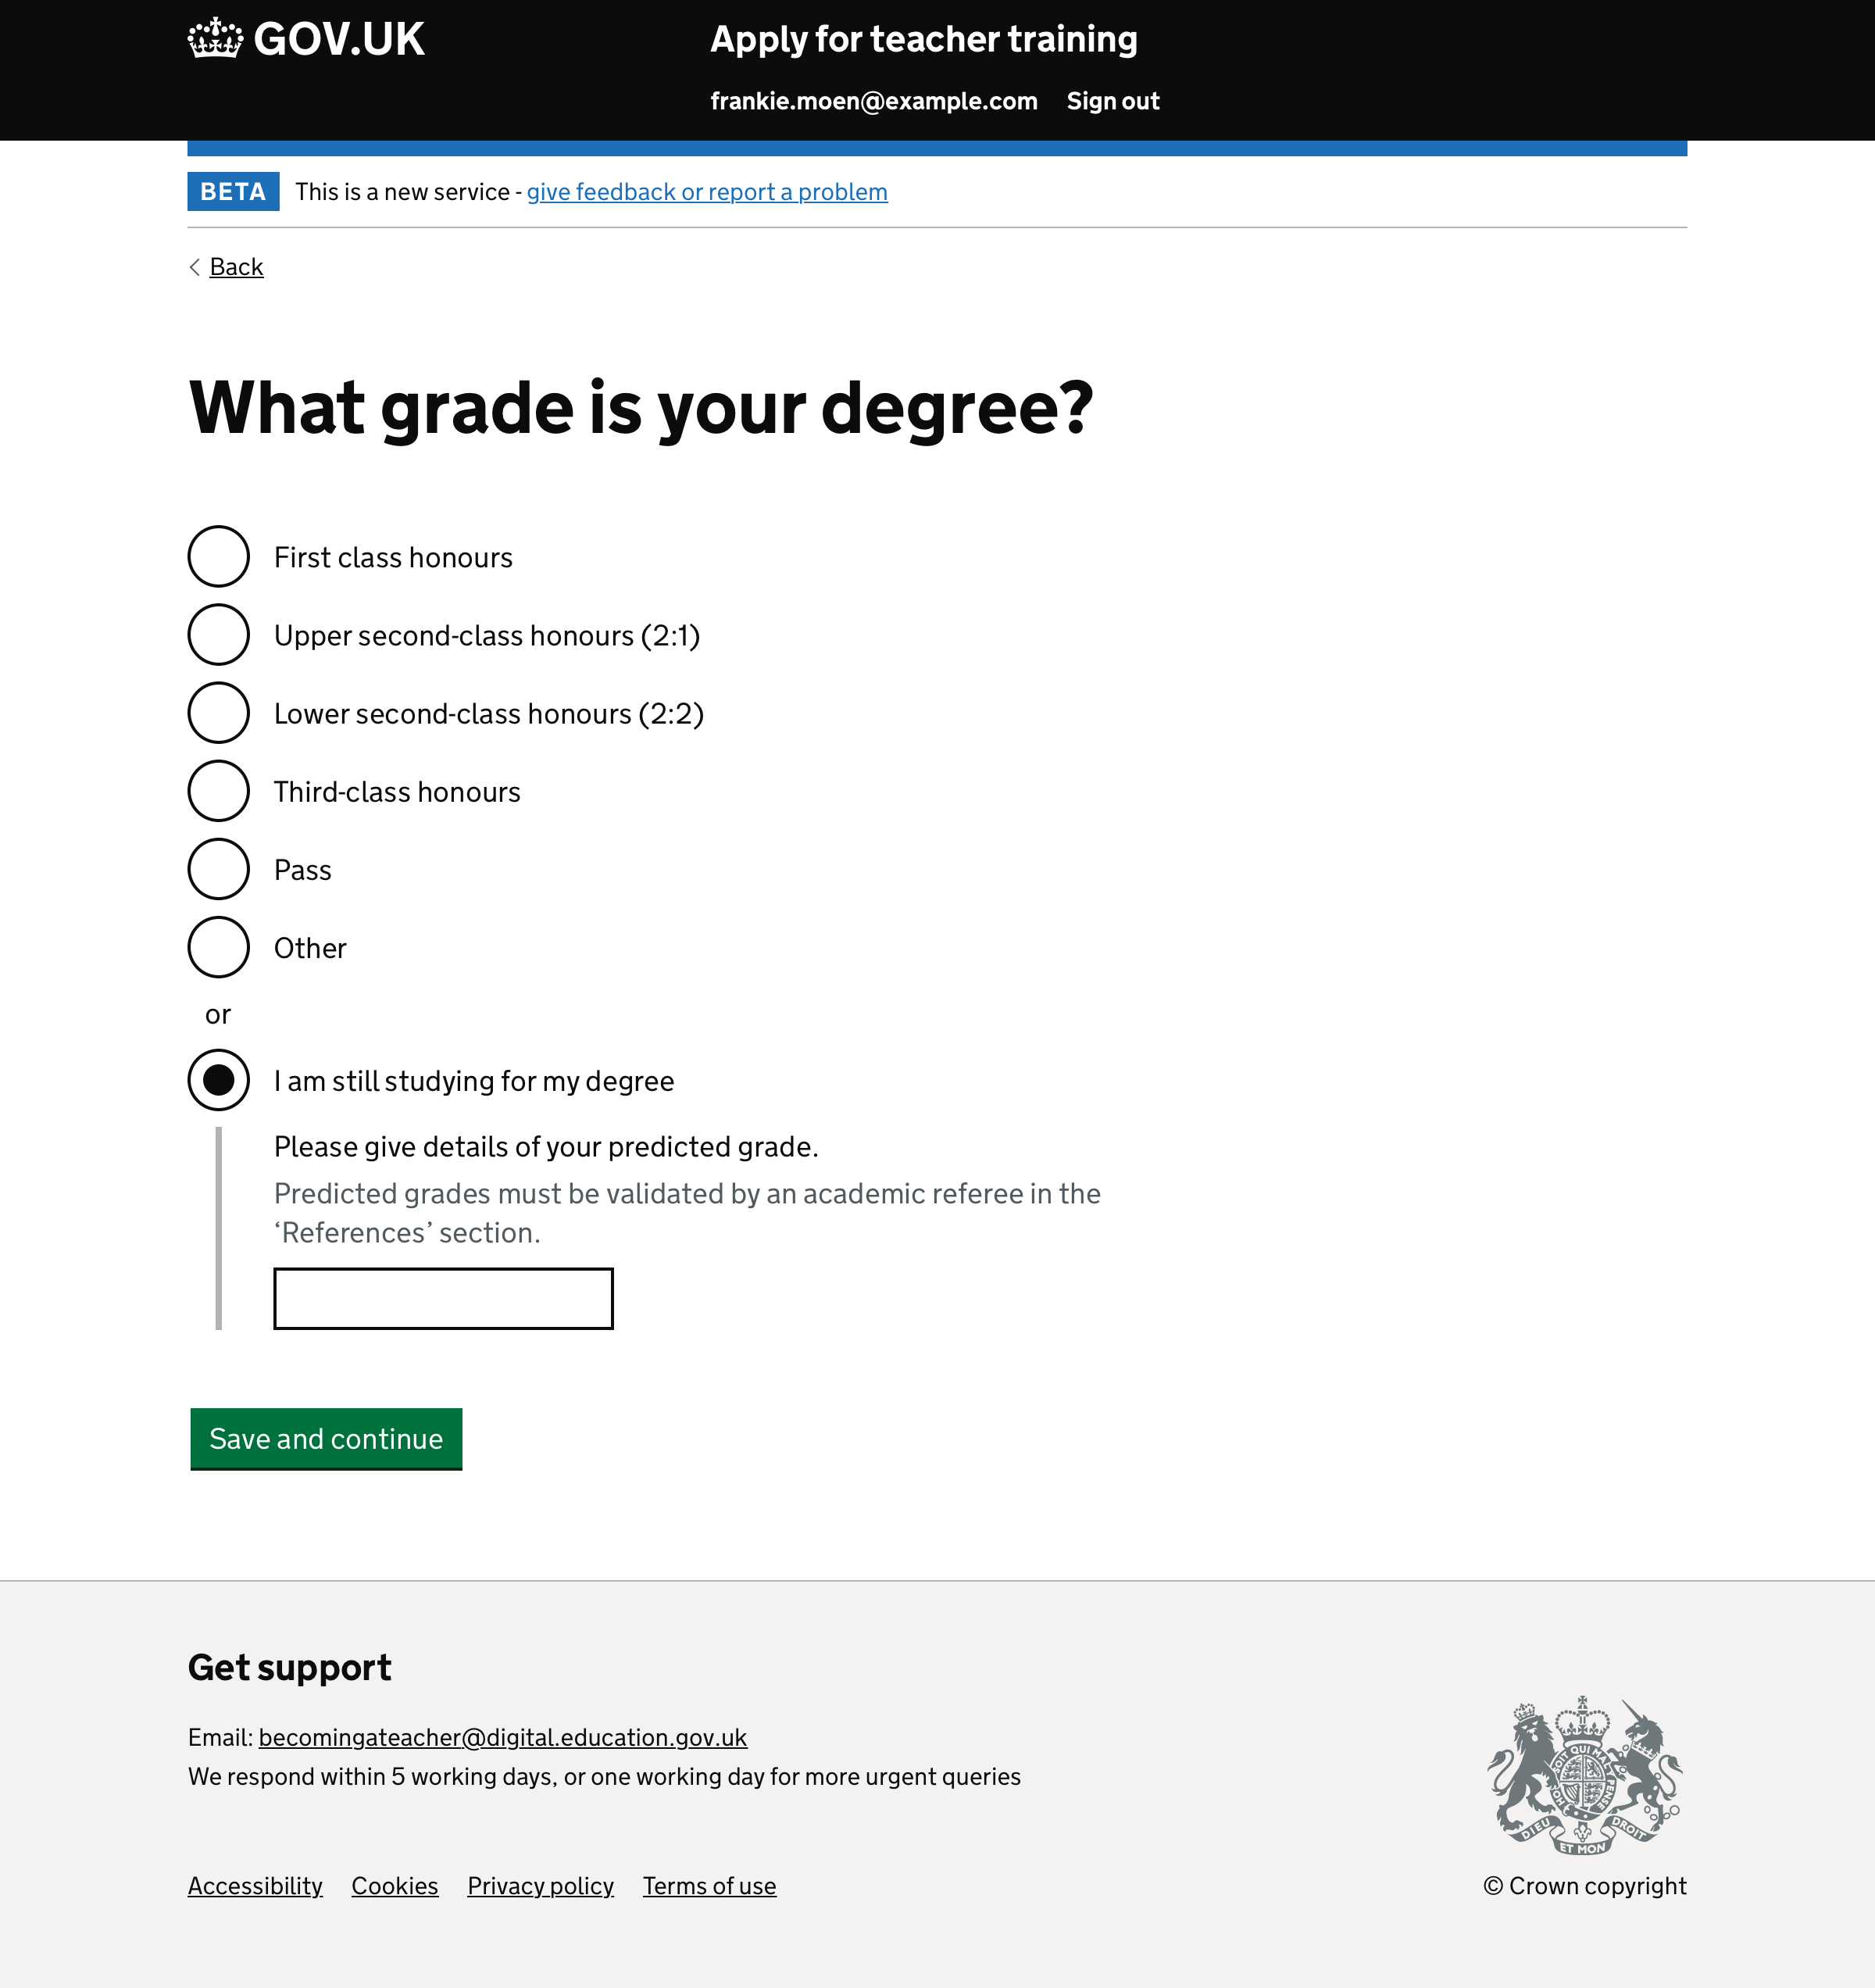 Screenshot of ‘What grade is your degree?’ question.